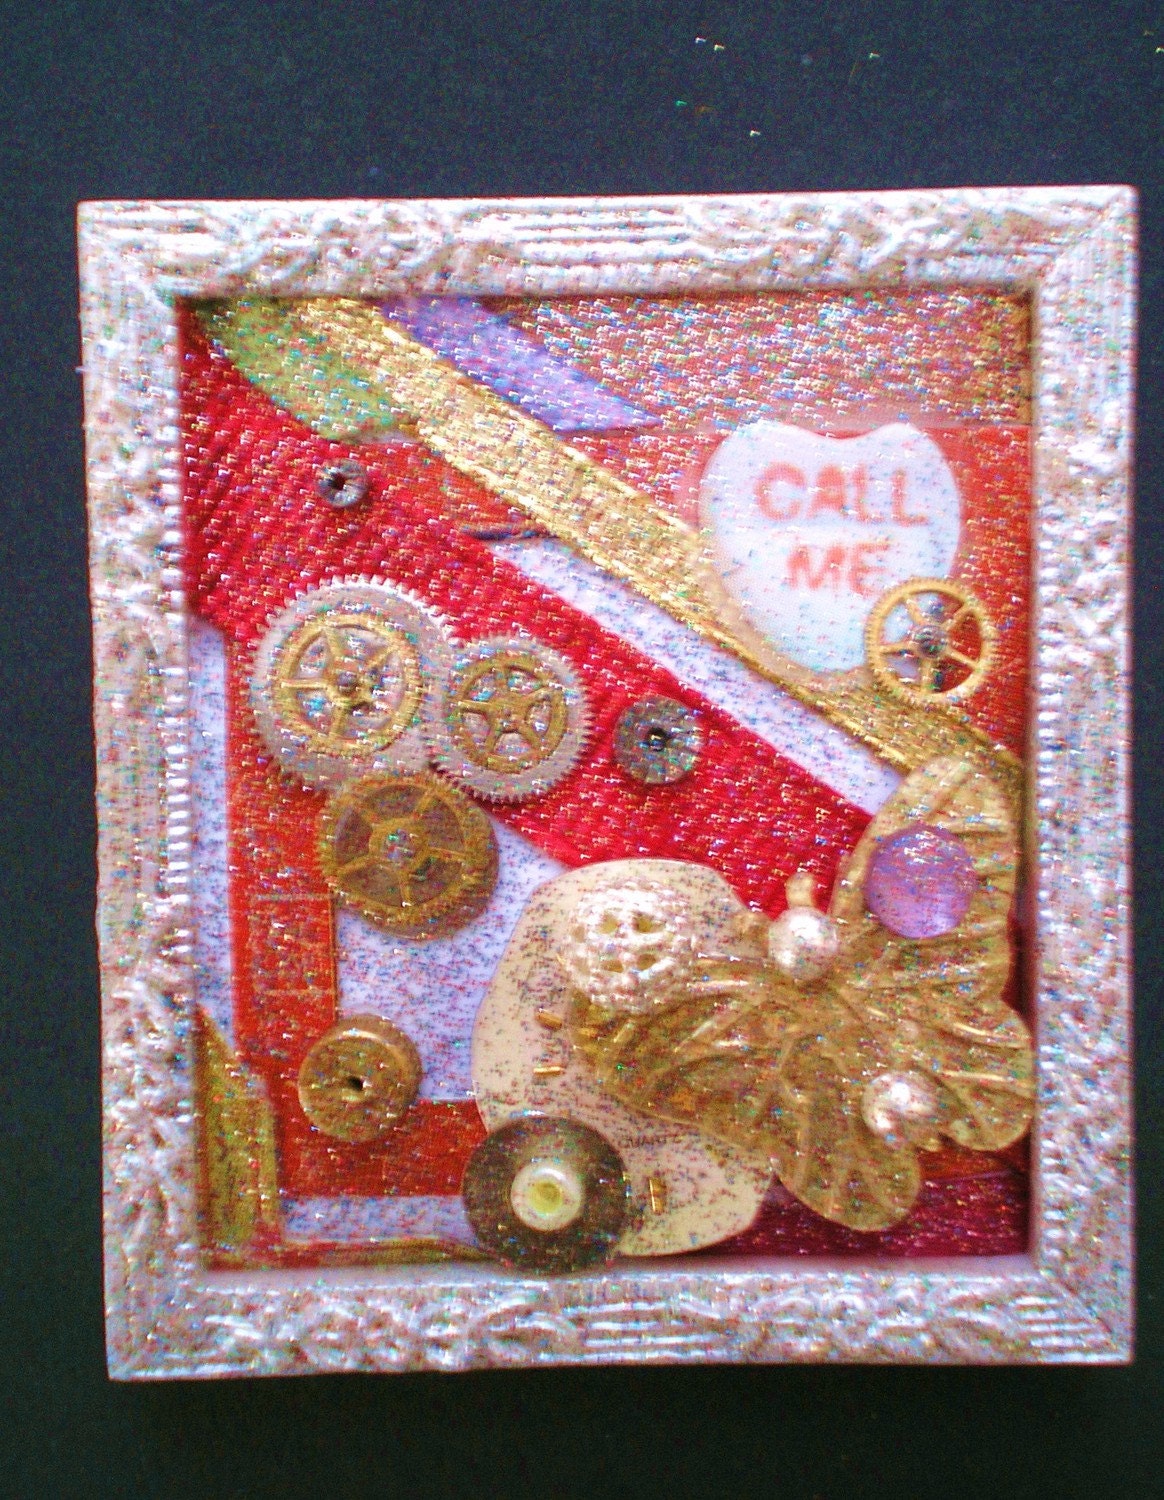 DEPARTURE - Tiny Collage Mixed Media OOAK Framed Signed with Jewels Gold Butterfly Heart Ribbon Watch Parts